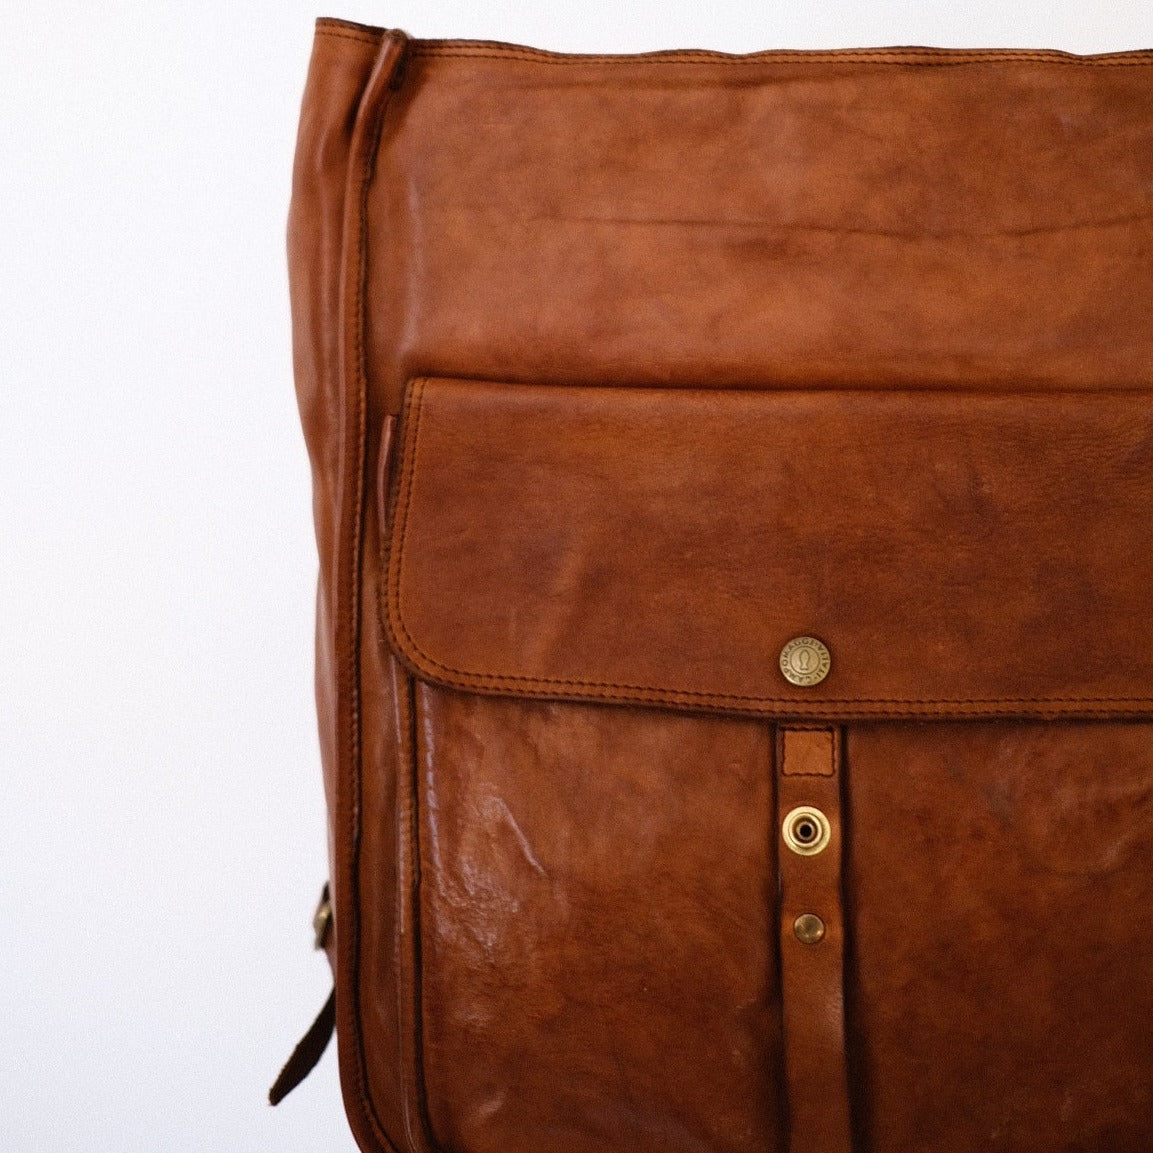 Orleans Backpack in Cognac - Campomaggi